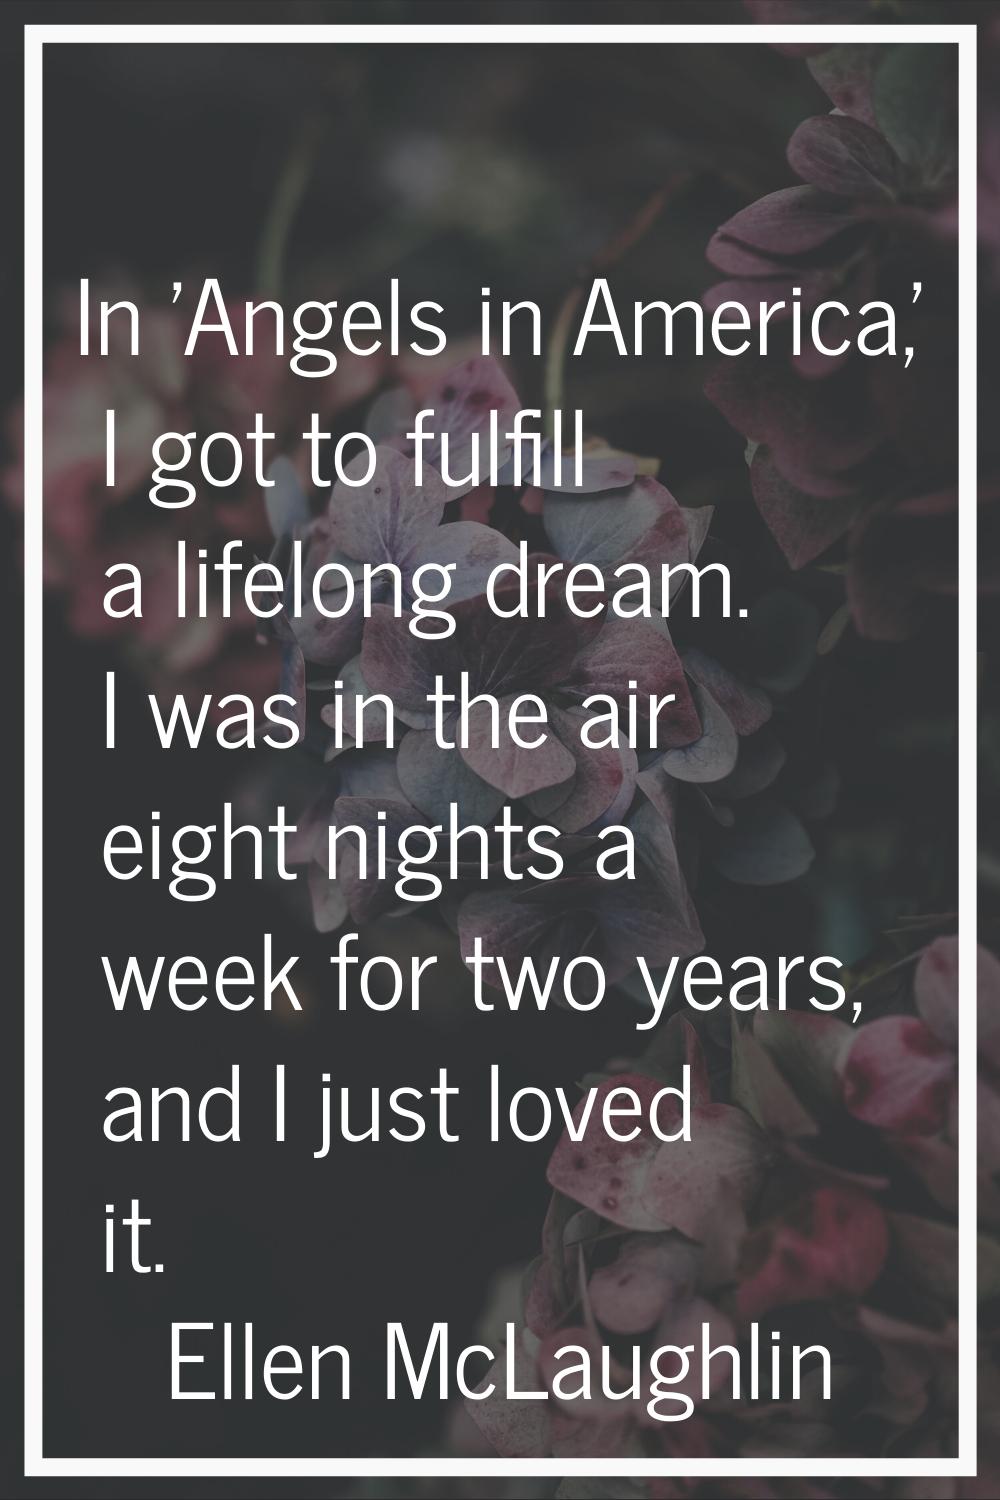 In 'Angels in America,' I got to fulfill a lifelong dream. I was in the air eight nights a week for